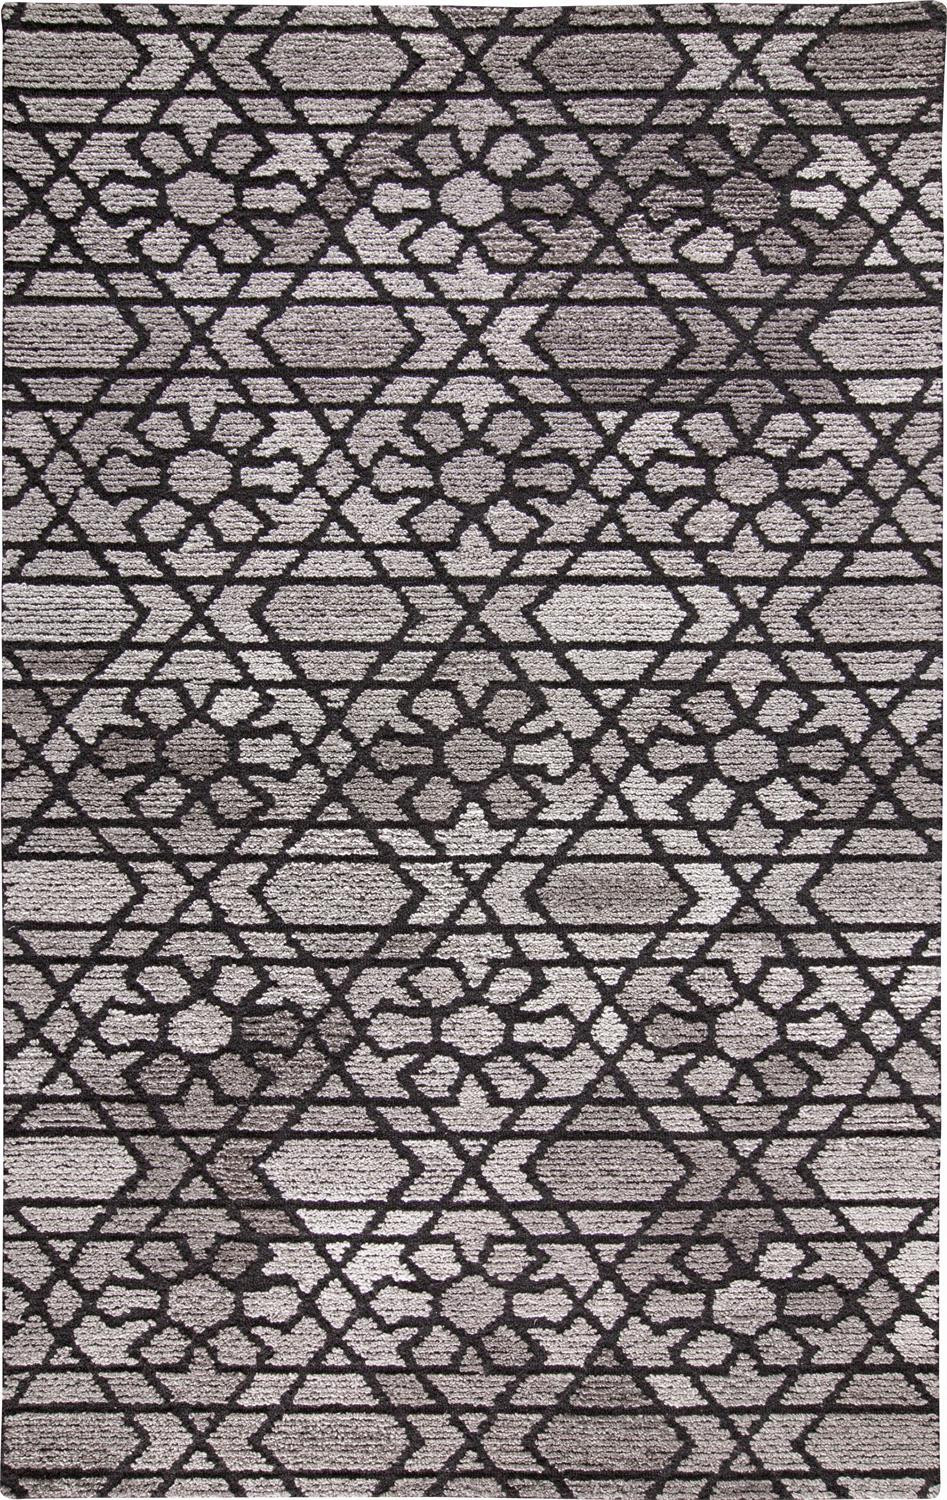 2' X 3' Taupe Black And Gray Wool Paisley Tufted Handmade Area Rug-512011-1